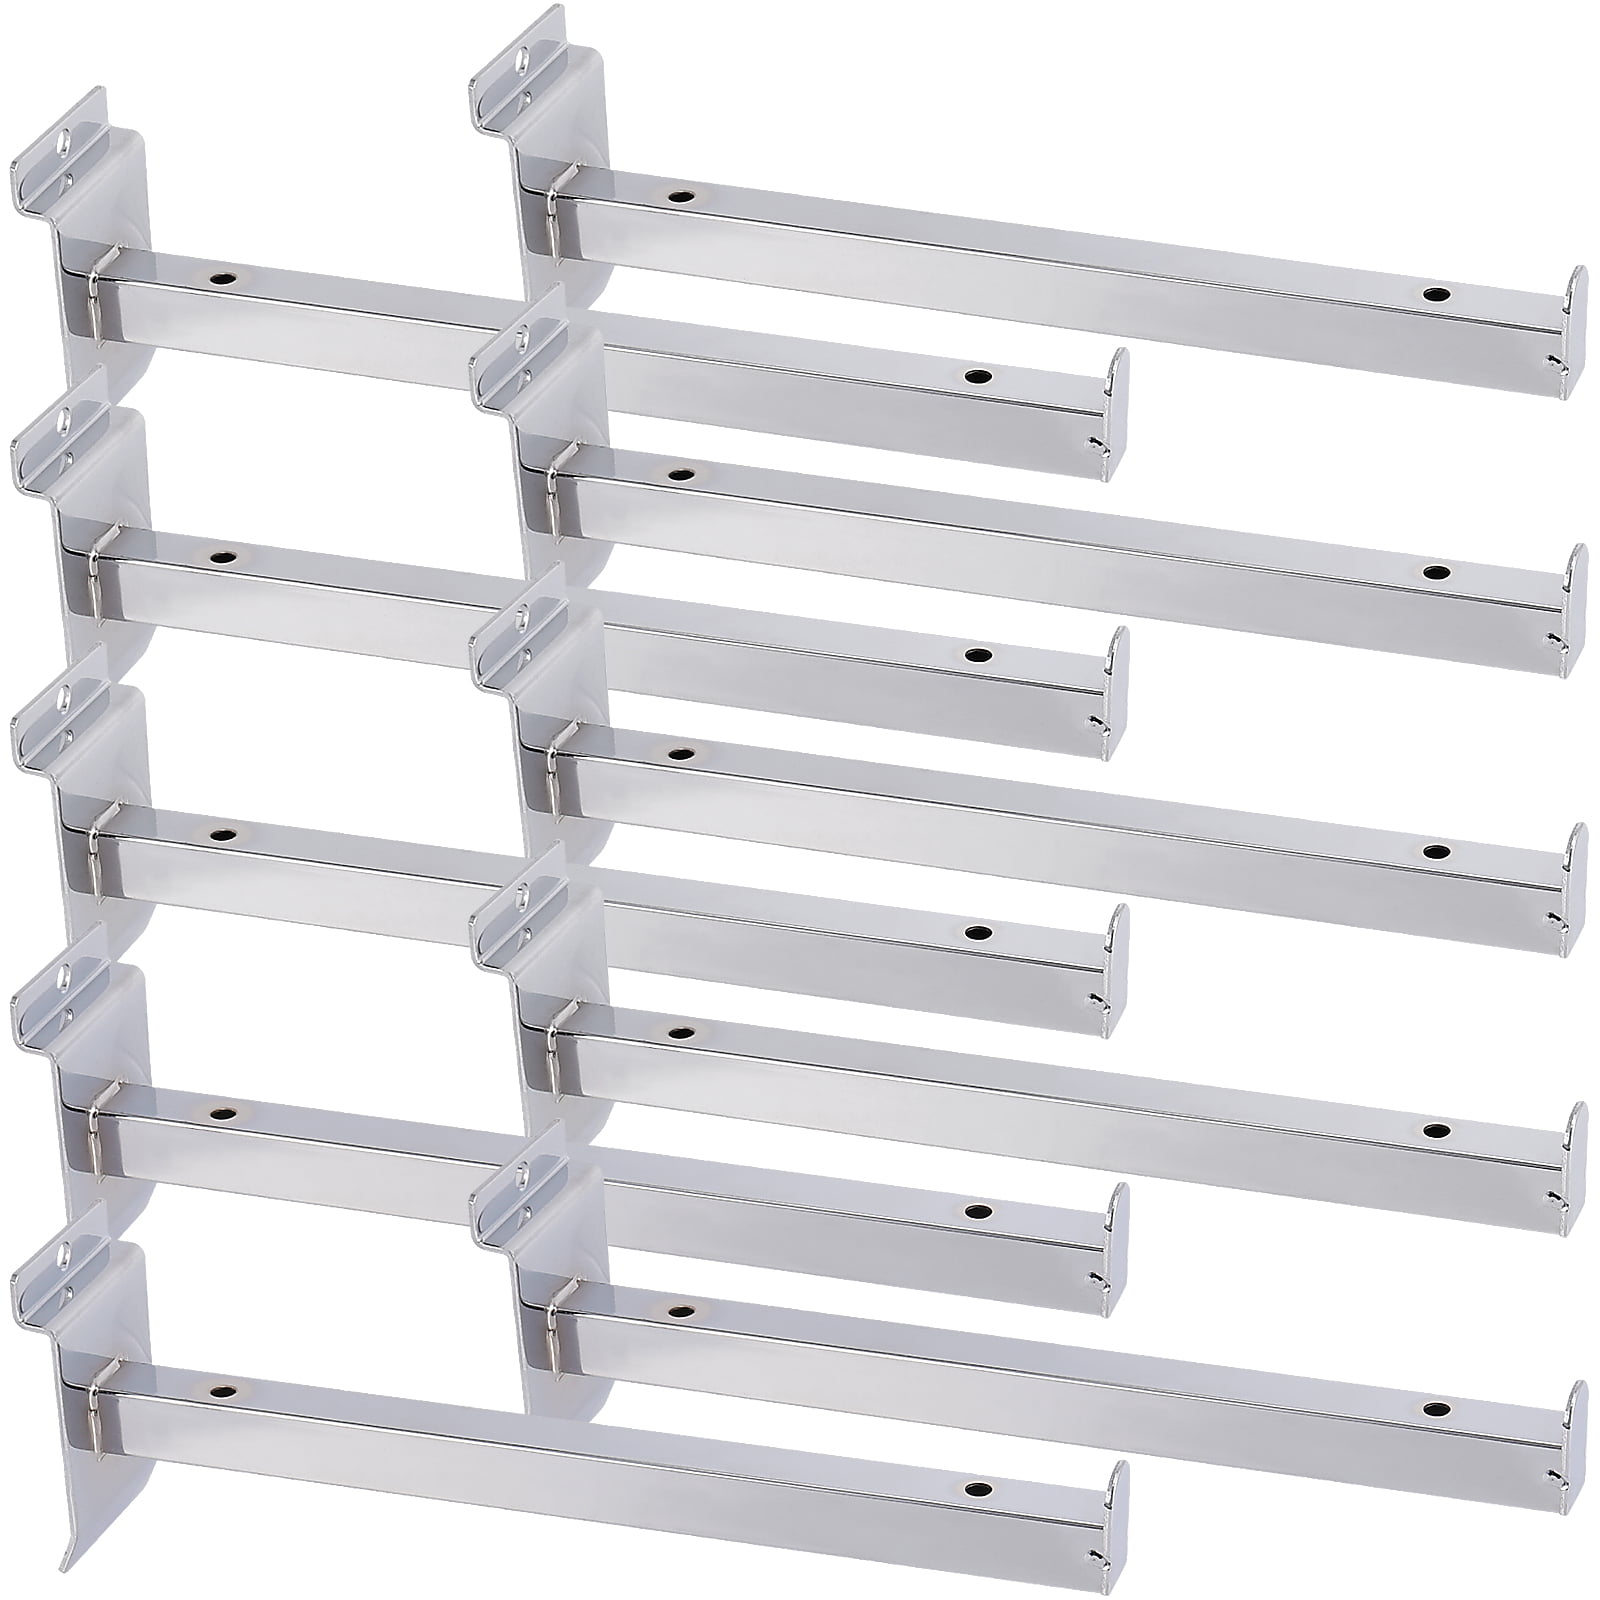 Details about   Small Nickel Plated Shelf Bracket Glass Shelf Support 5-8mm thick Shelves Packs 